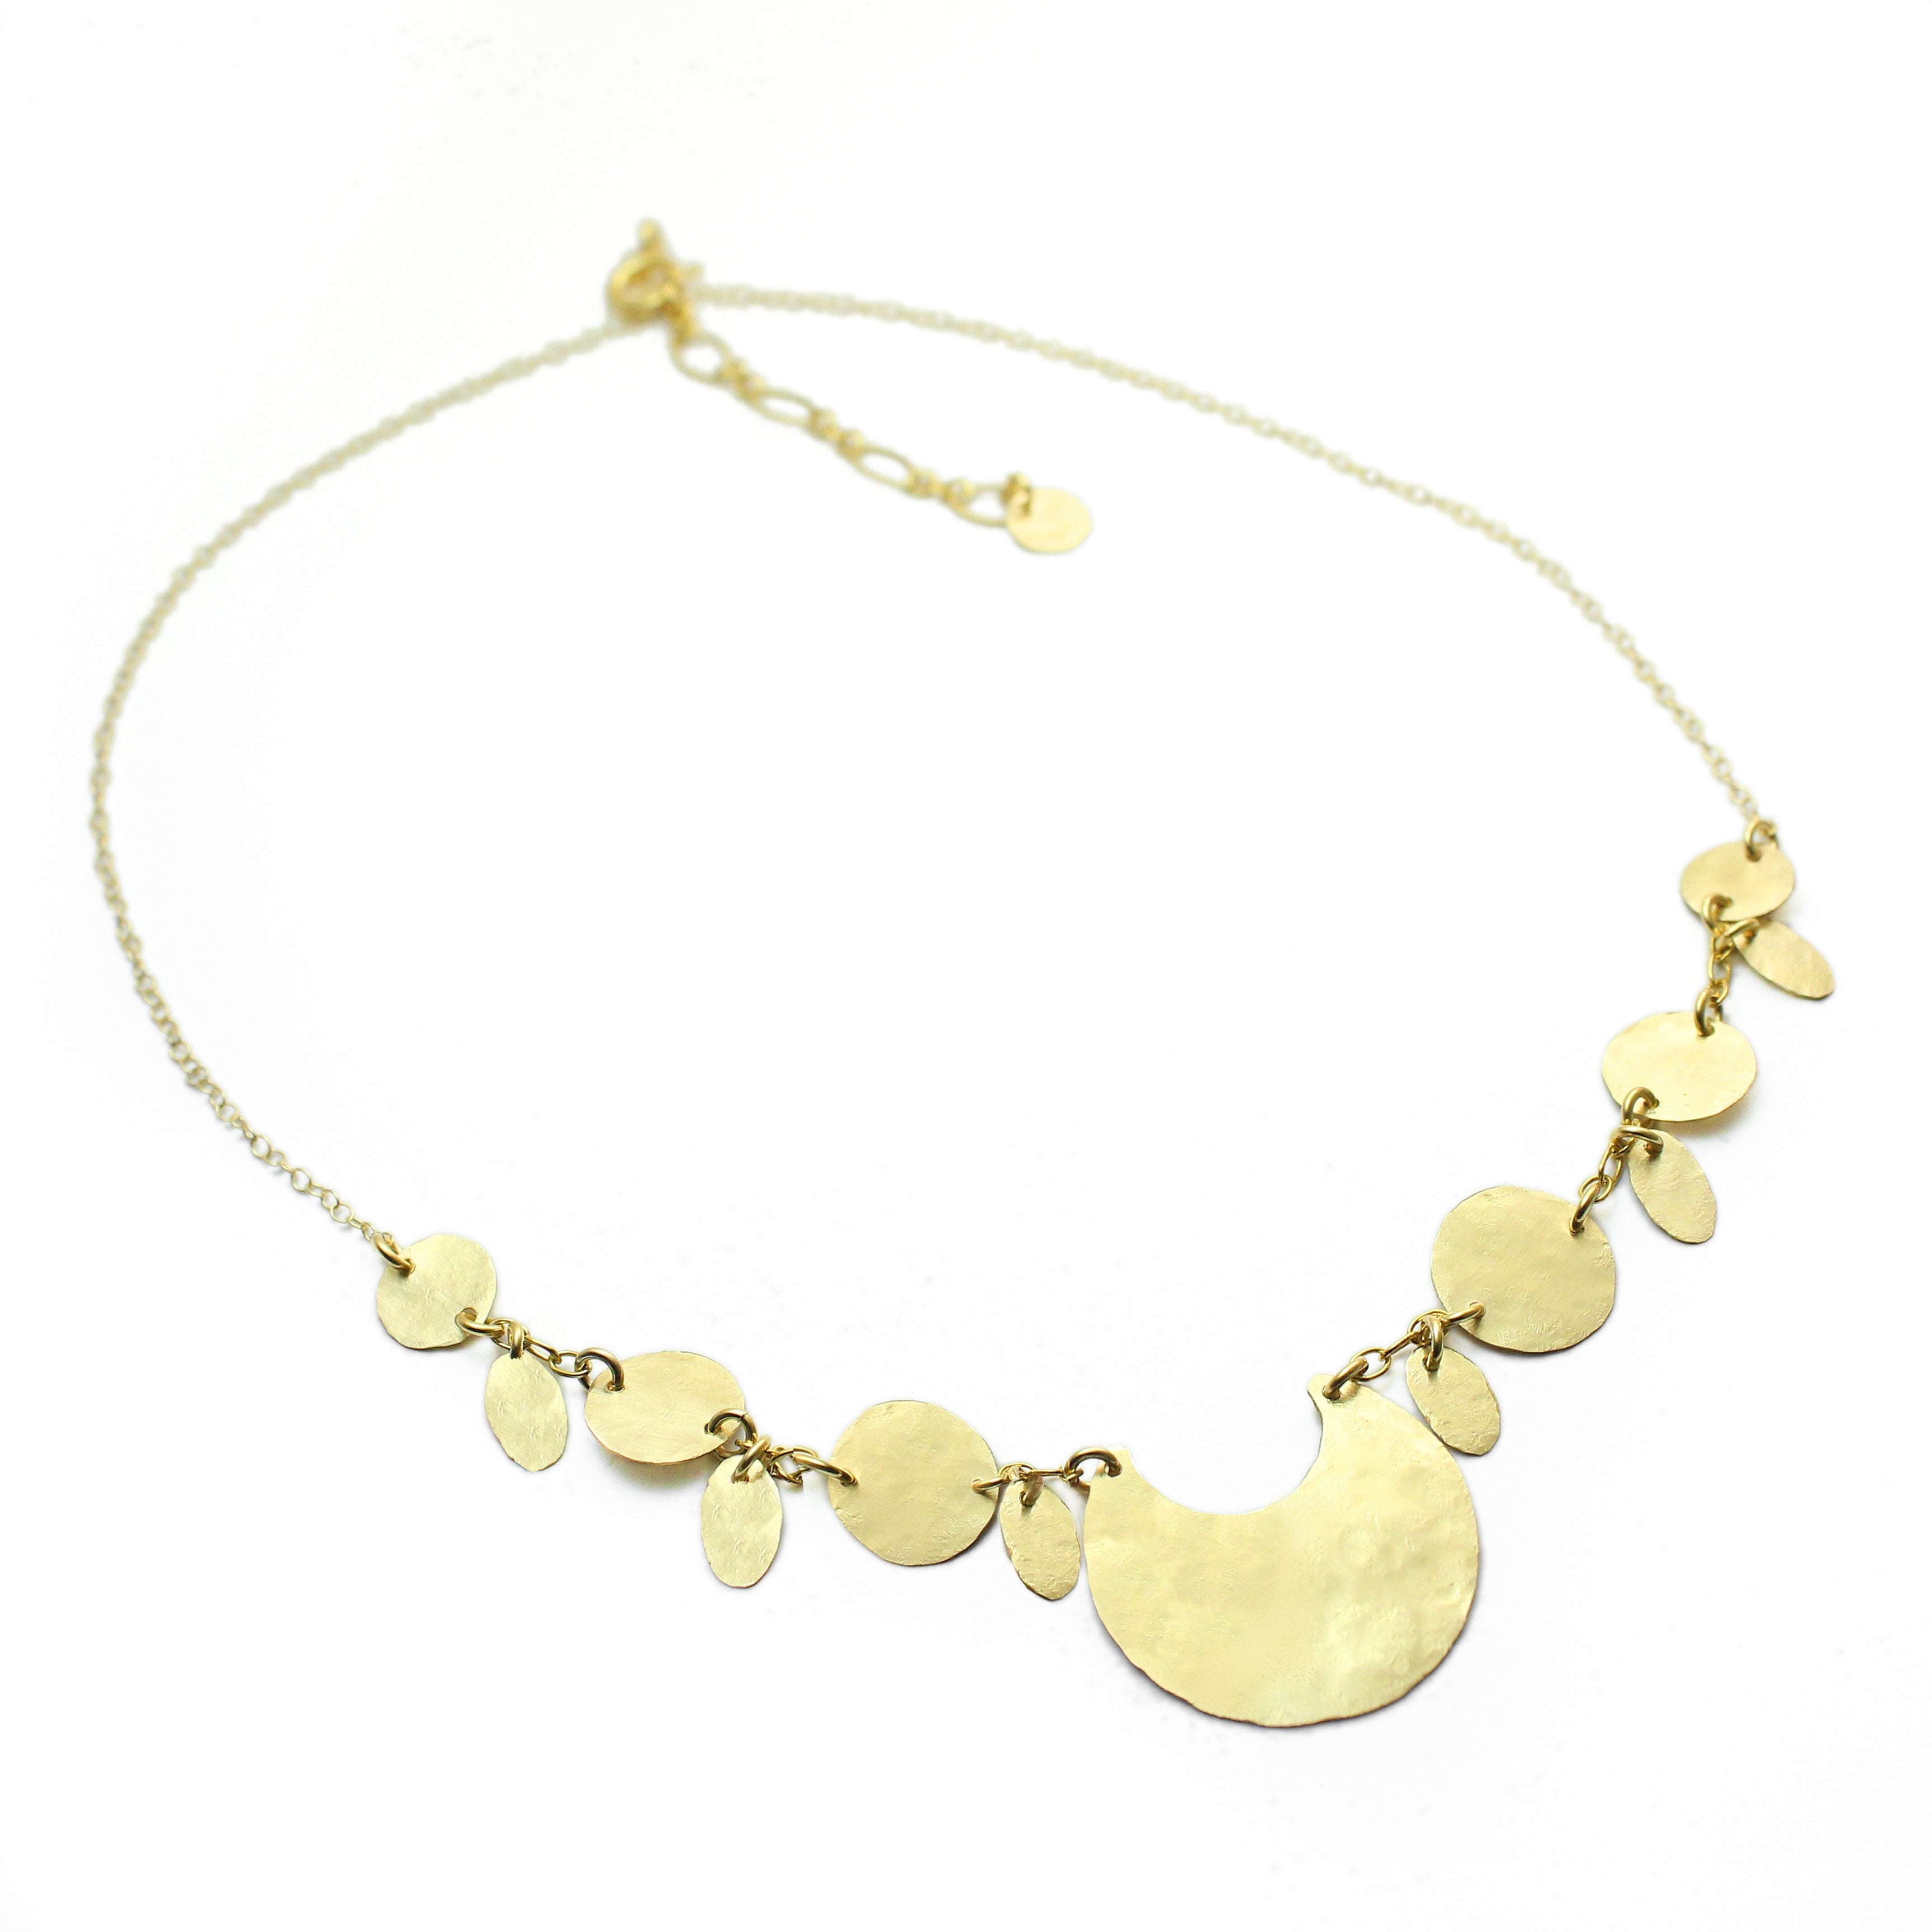 Ancient Egyptian Necklace (Gold filled/Silver) - Shulamit Kanter